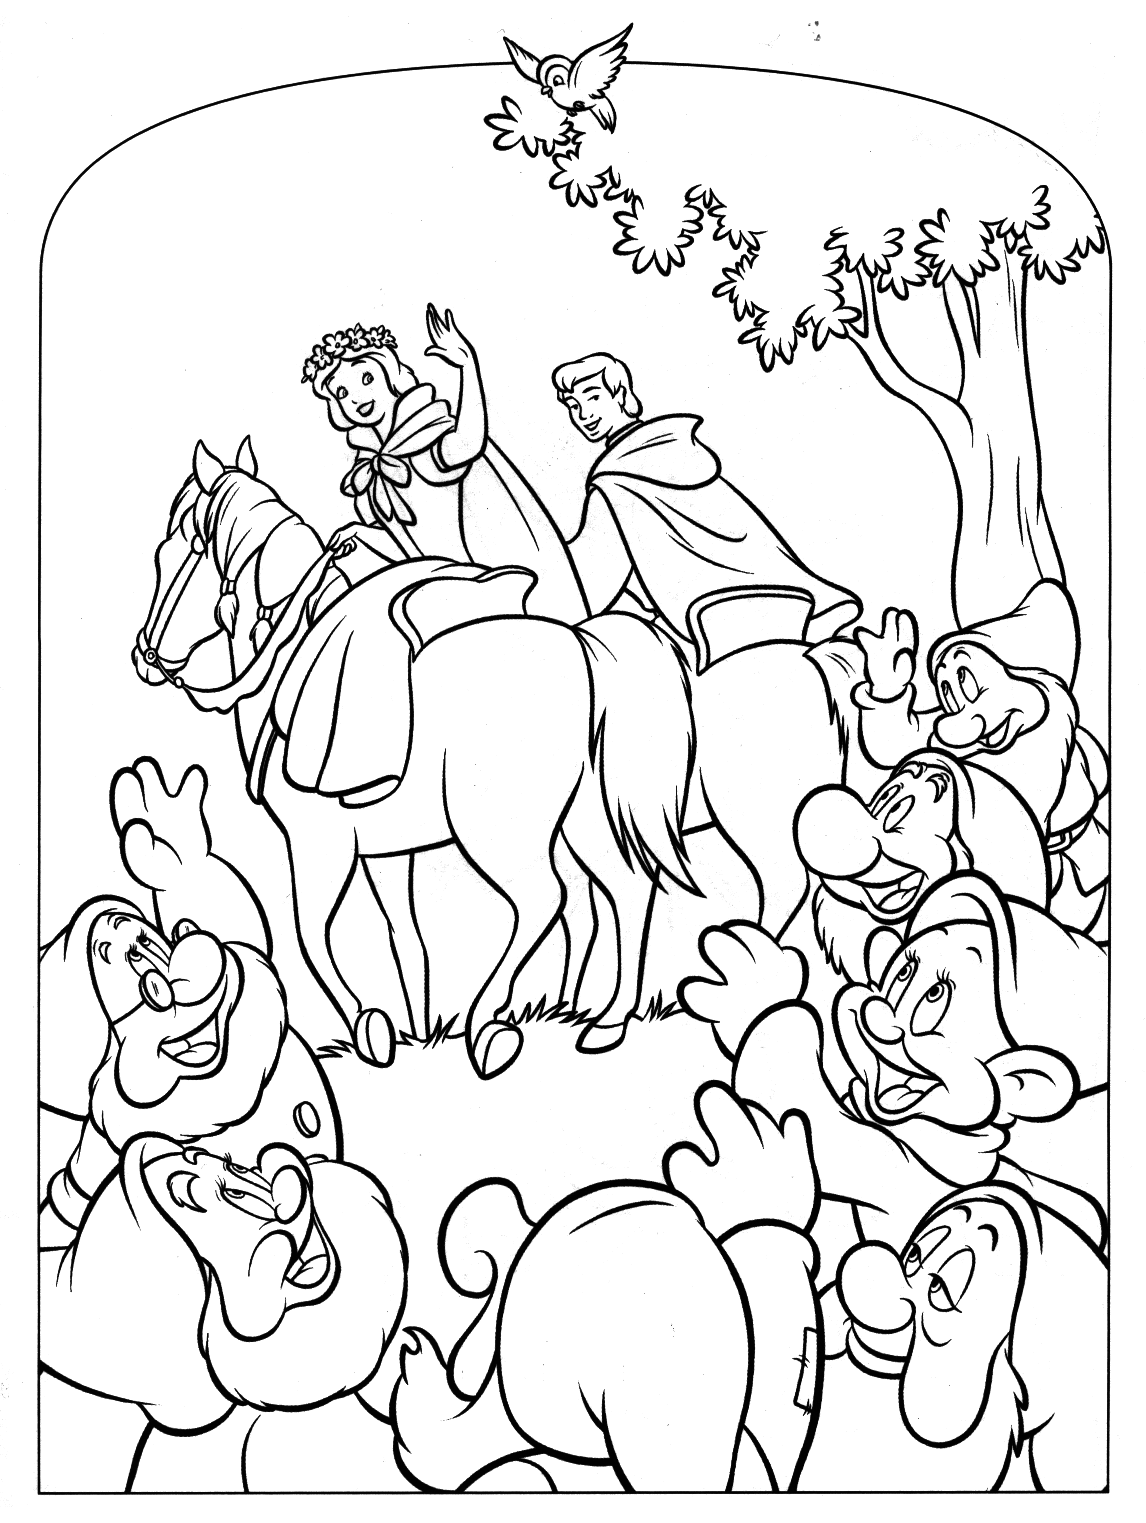 Free Snow White coloring page to download